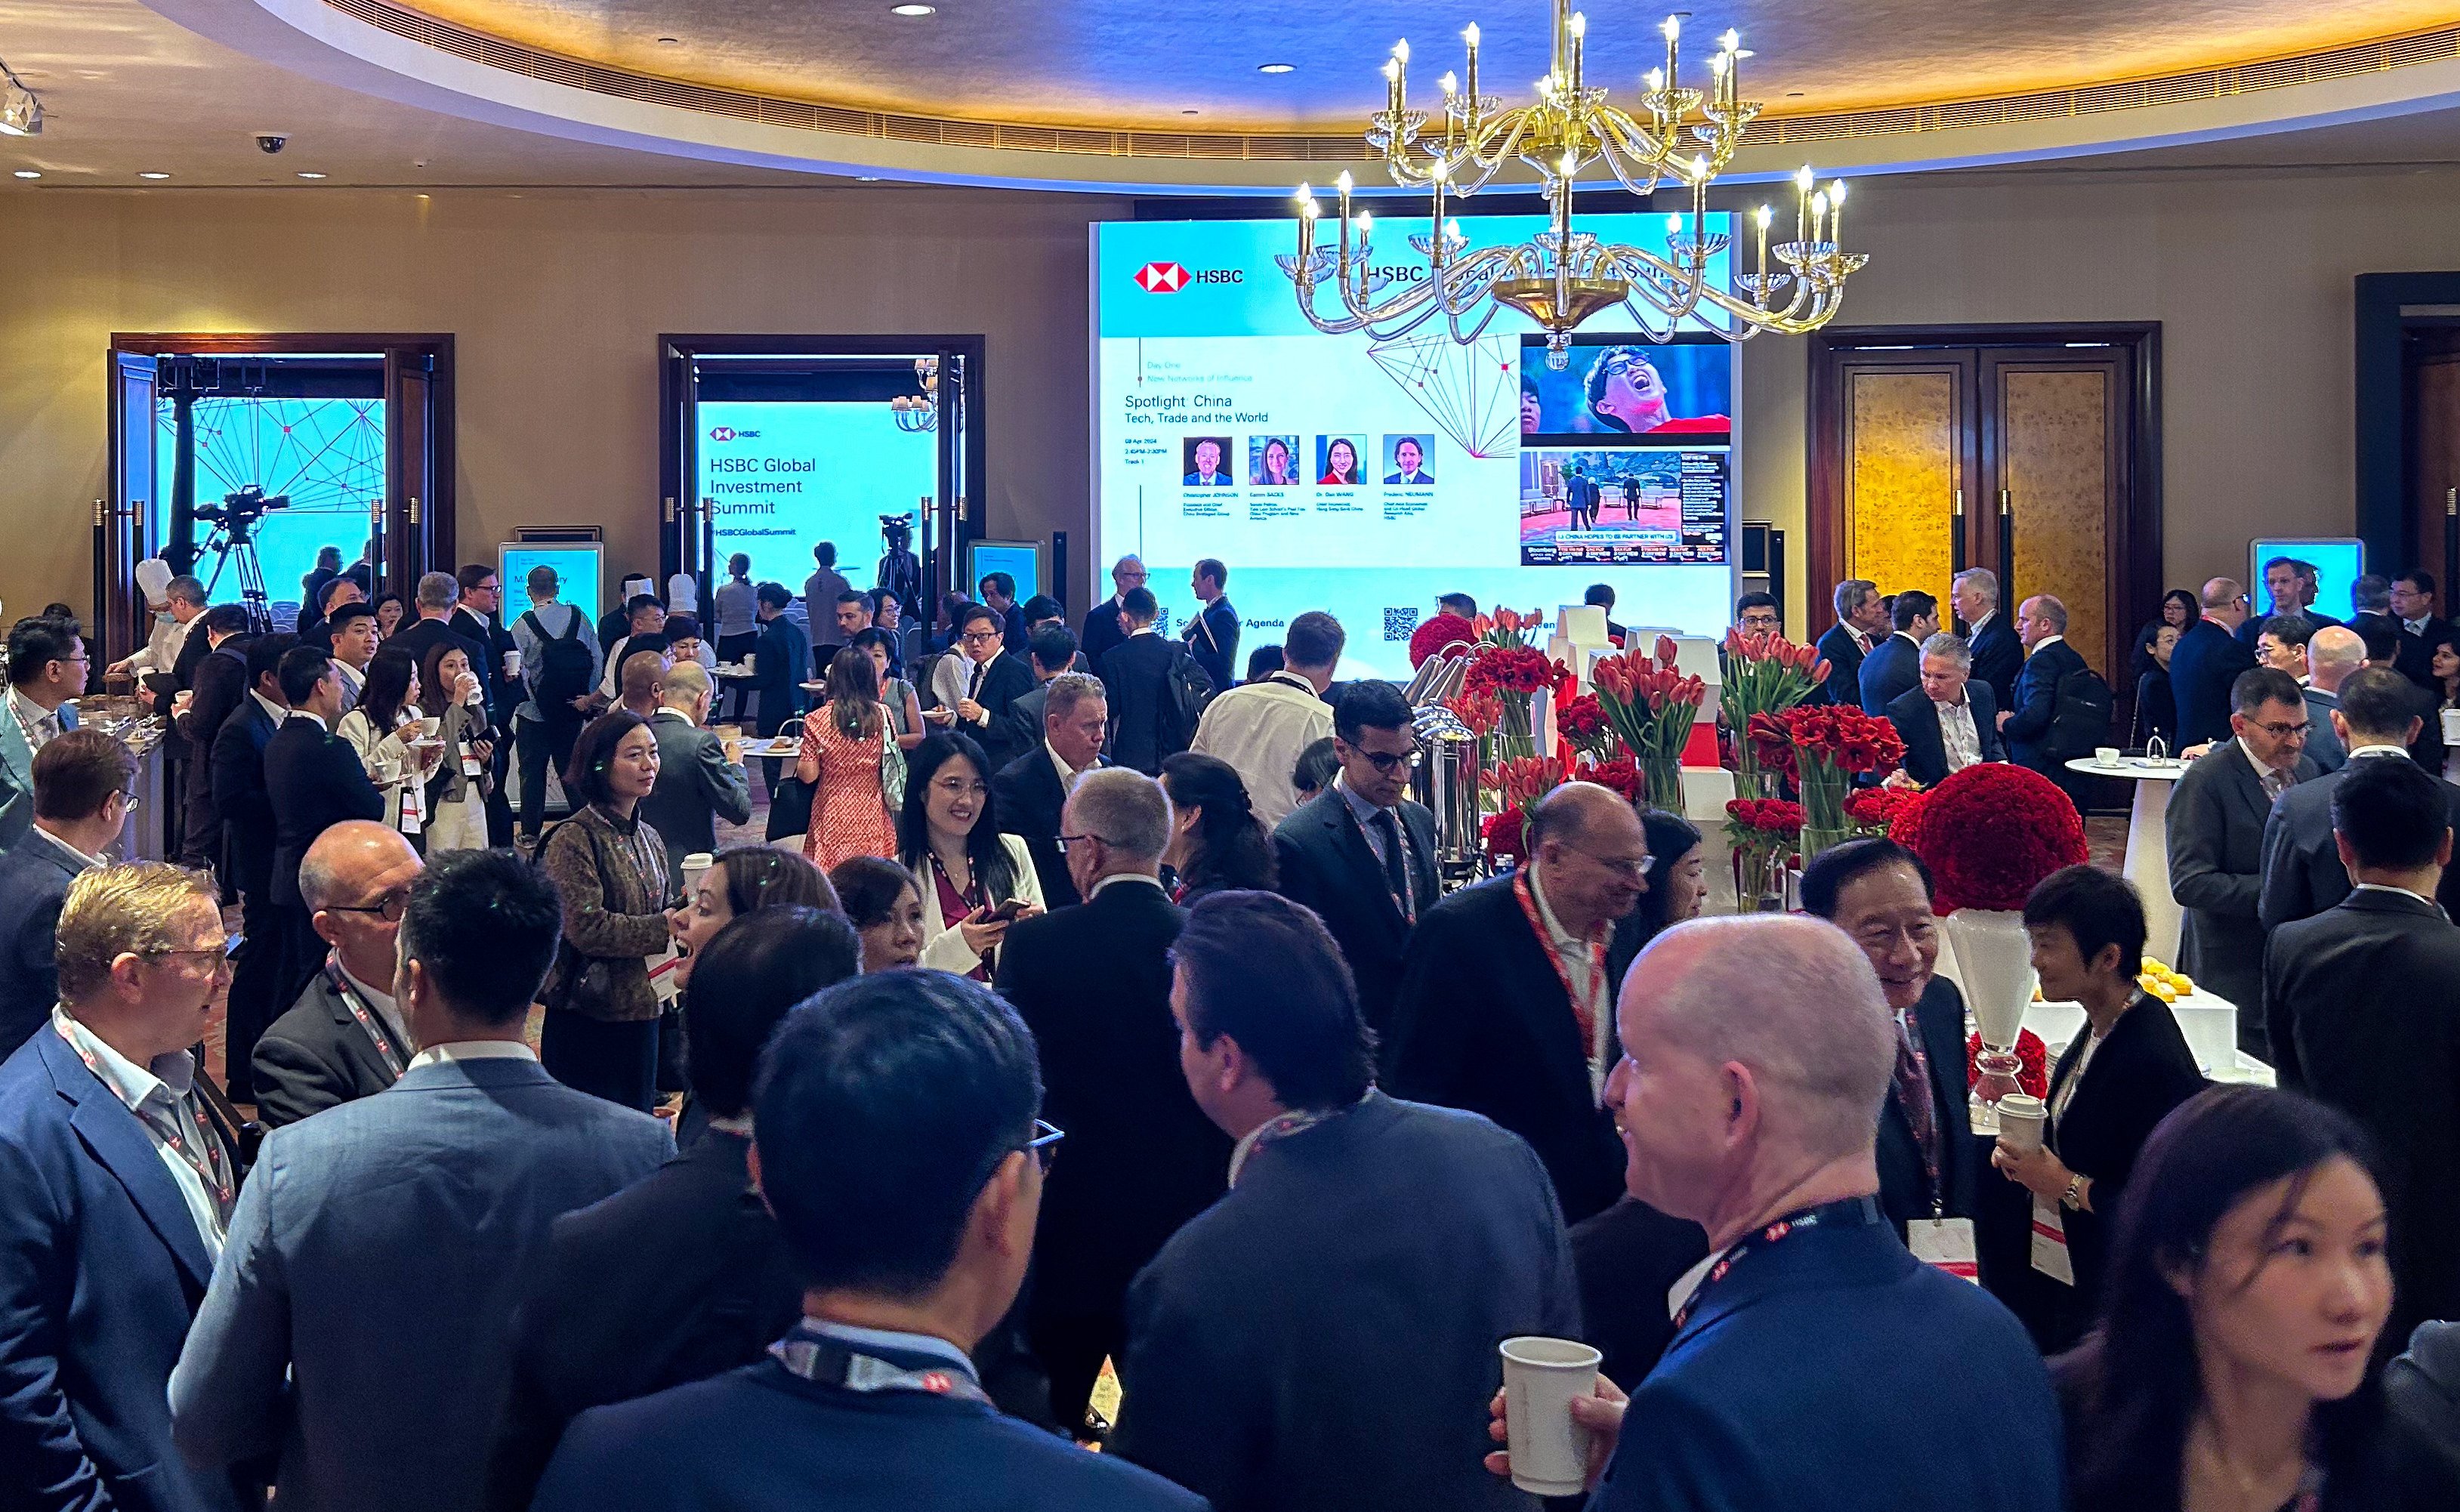 HSBC, the biggest commercial bank in Hong Kong, hosted some 3,500 attendees this week in the largest investment conference in the city. Photo: Mia Castagnone